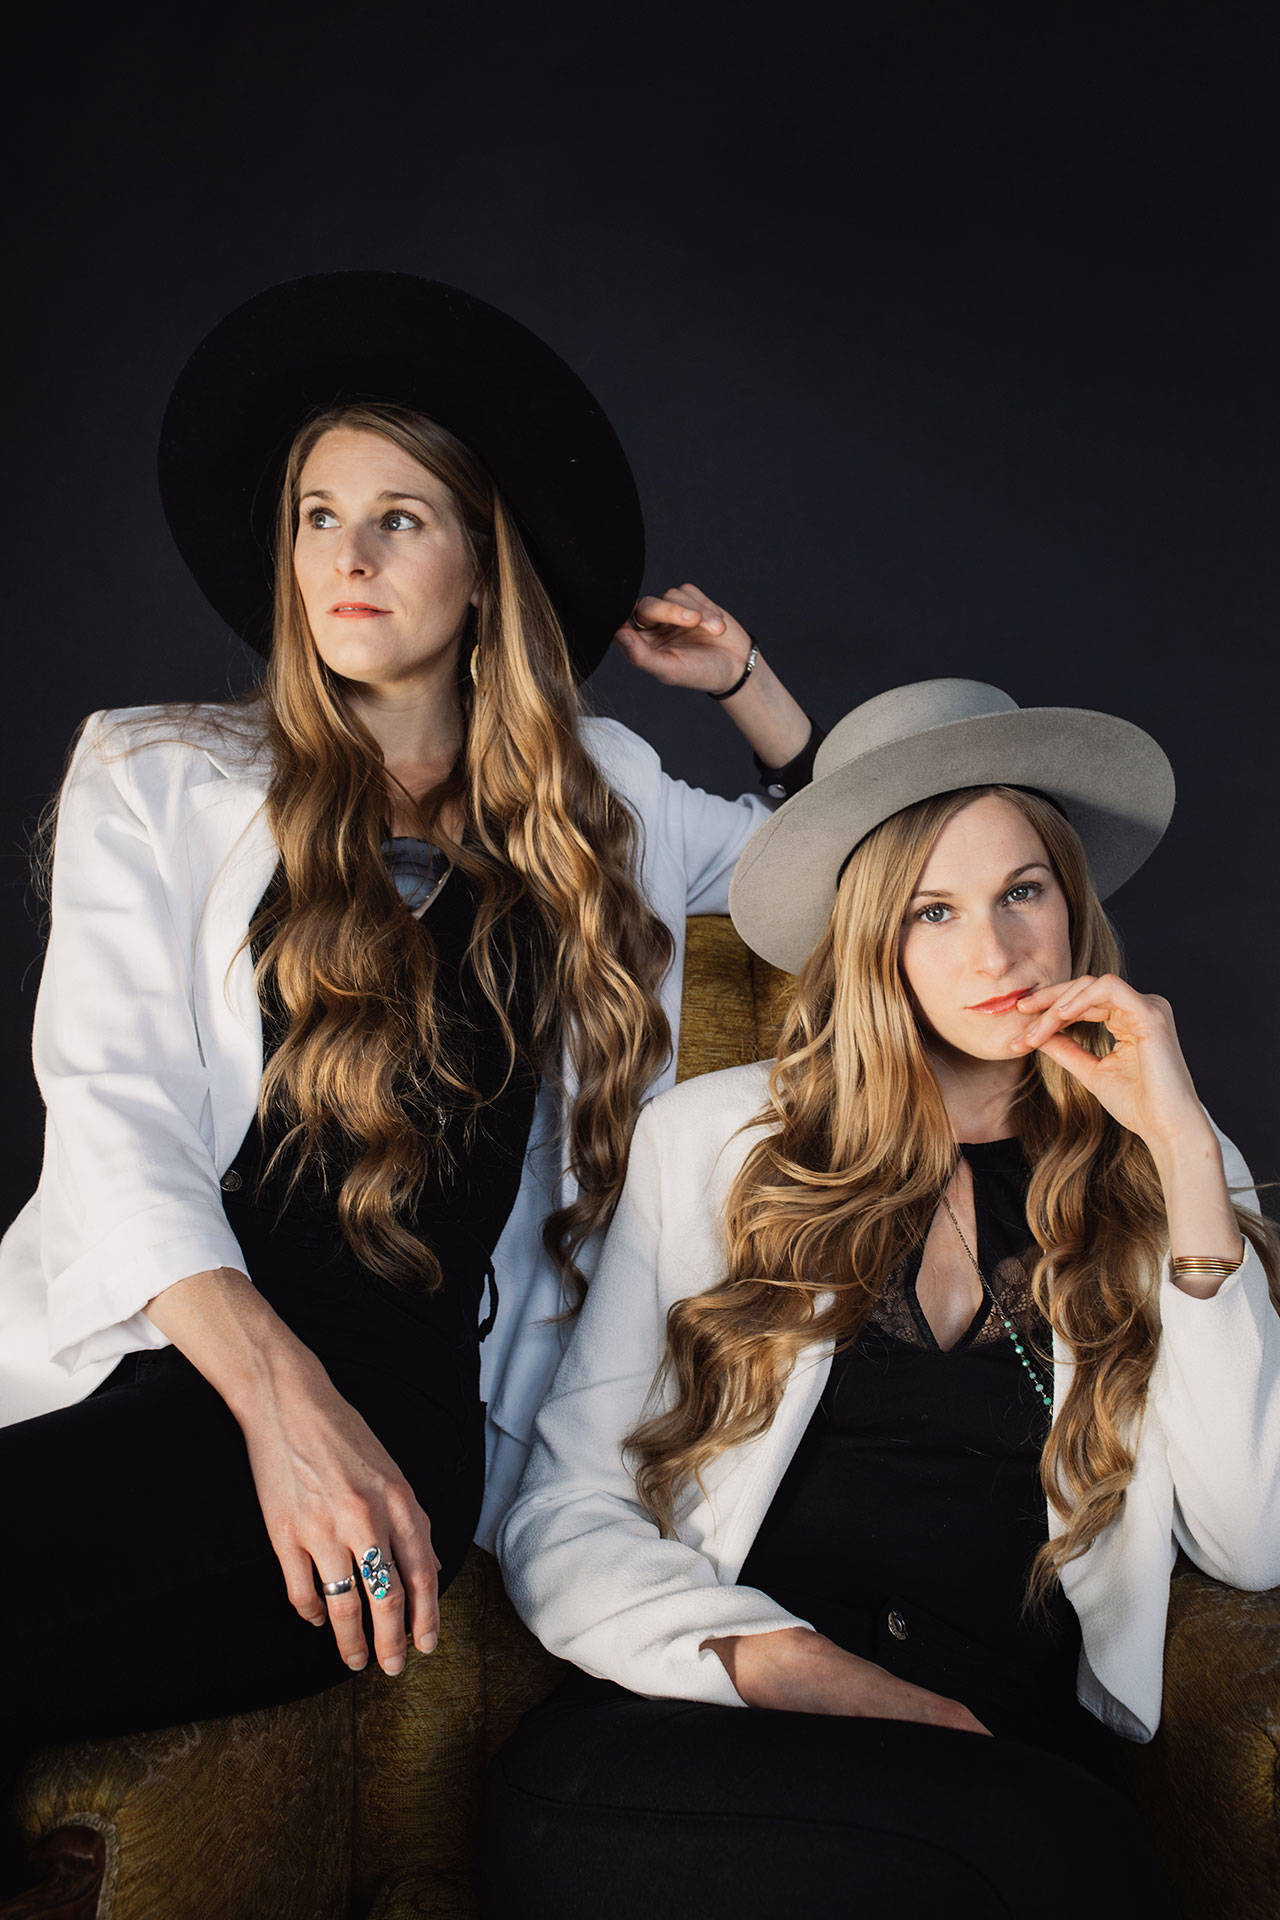 The Shook Twins will play a show at Open Space on April 13 (Jessie McCall Photo).